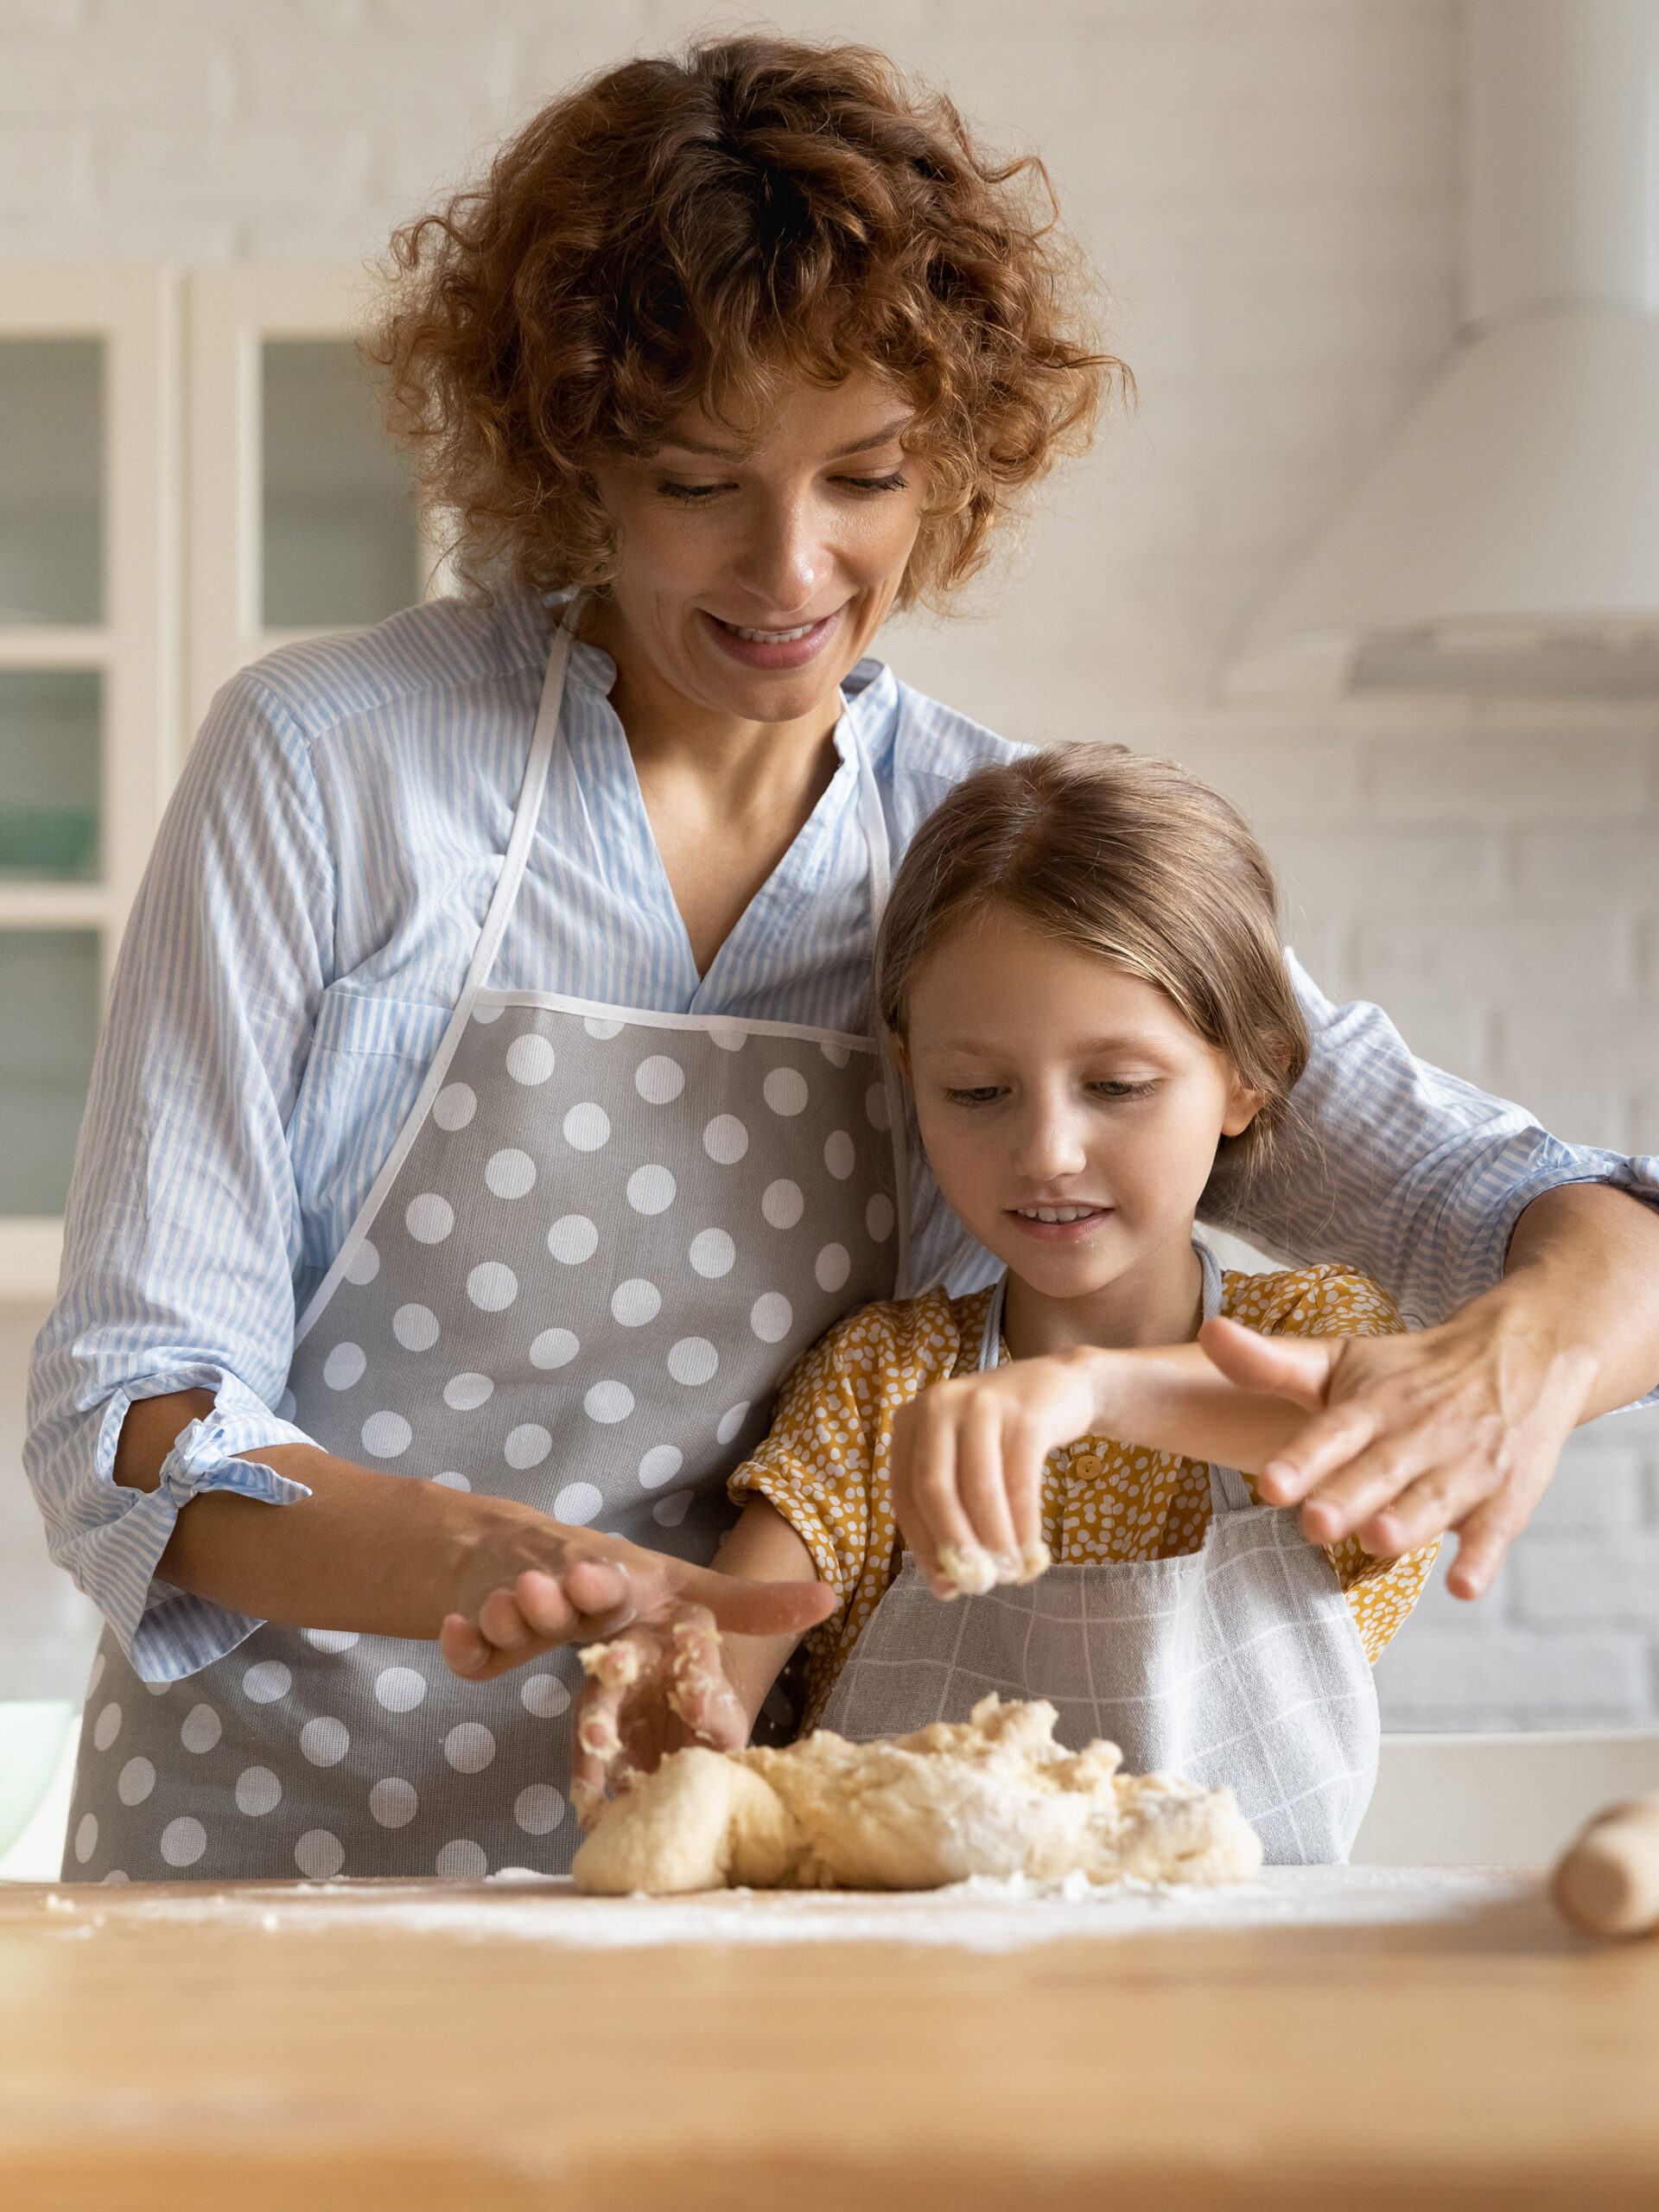 Parent and child bake together in kitchen - comfort baking with a healthier twist